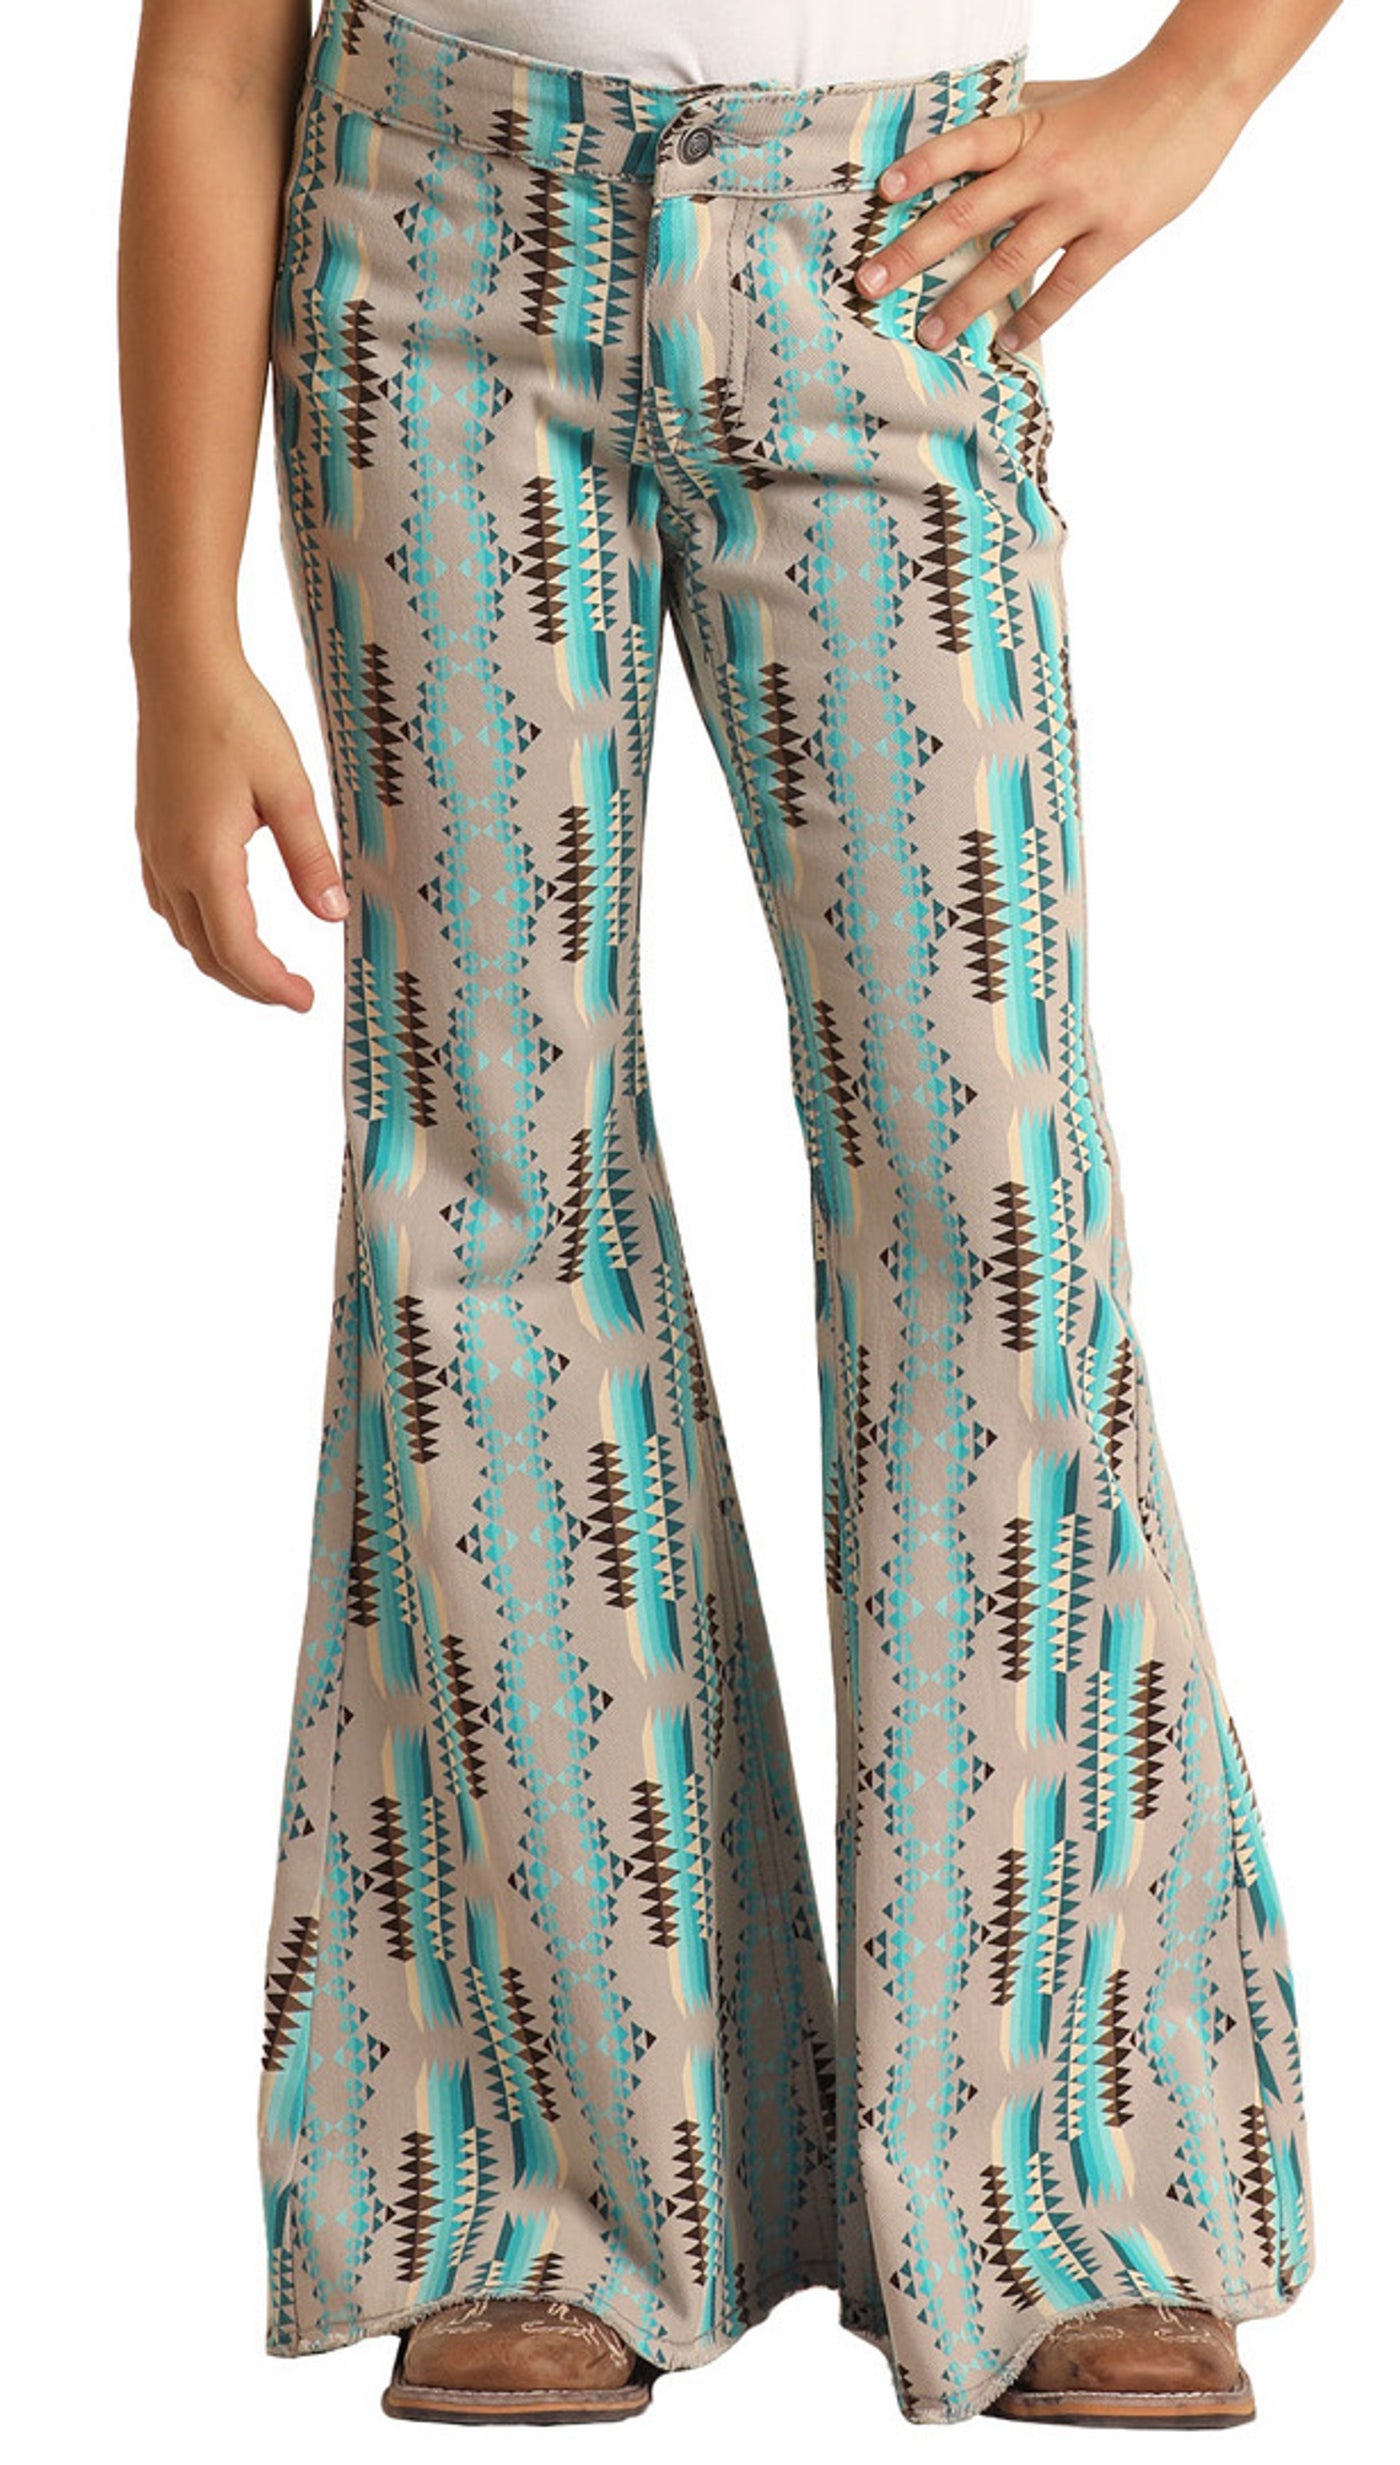 Rock & Roll High Rise Extra Stretch Aztec Pattern Flare Jeans